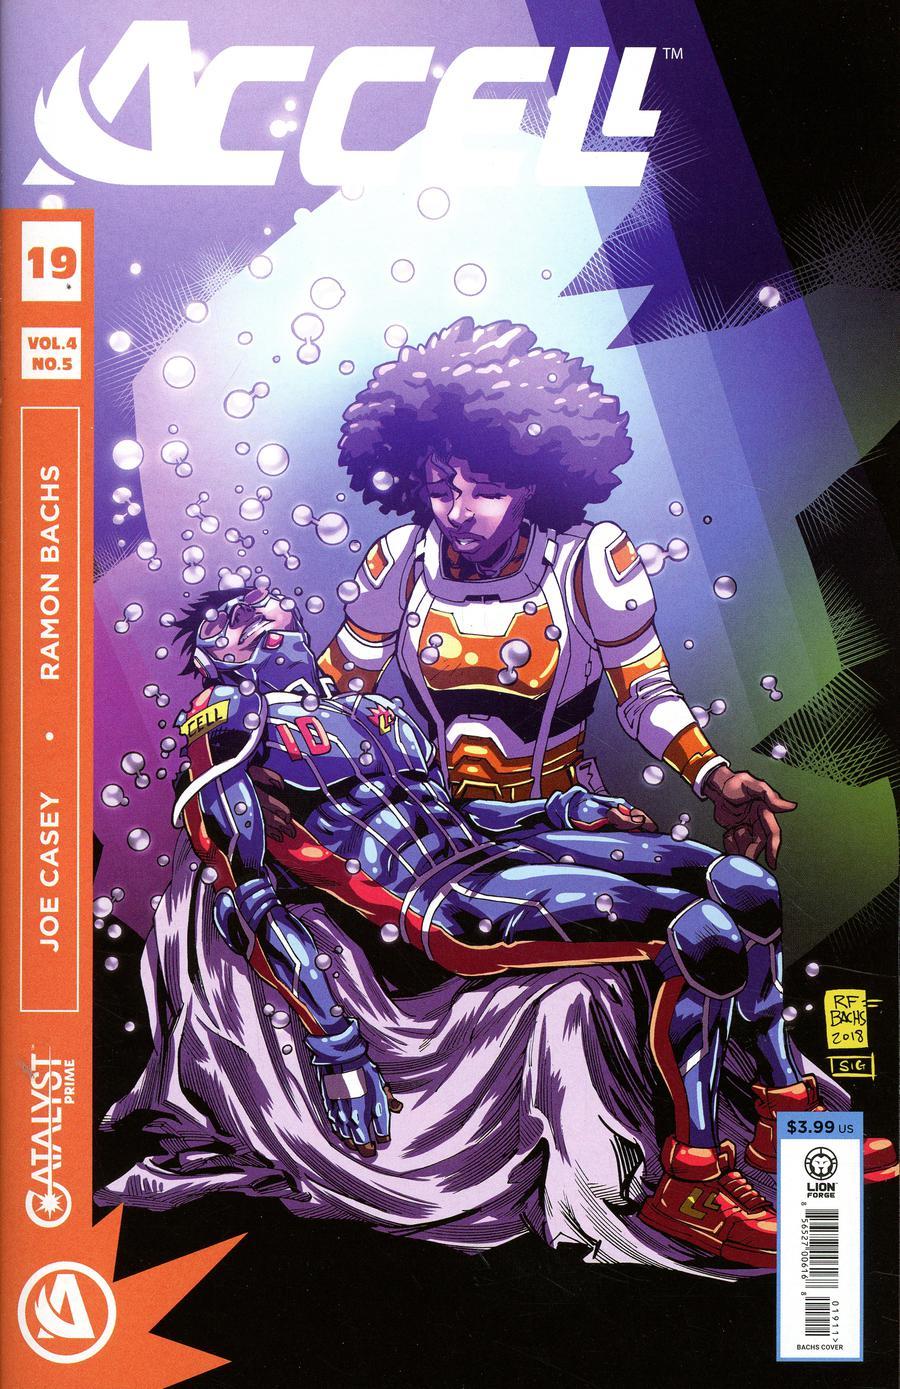 Catalyst Prime Accell Vol. 1 #19